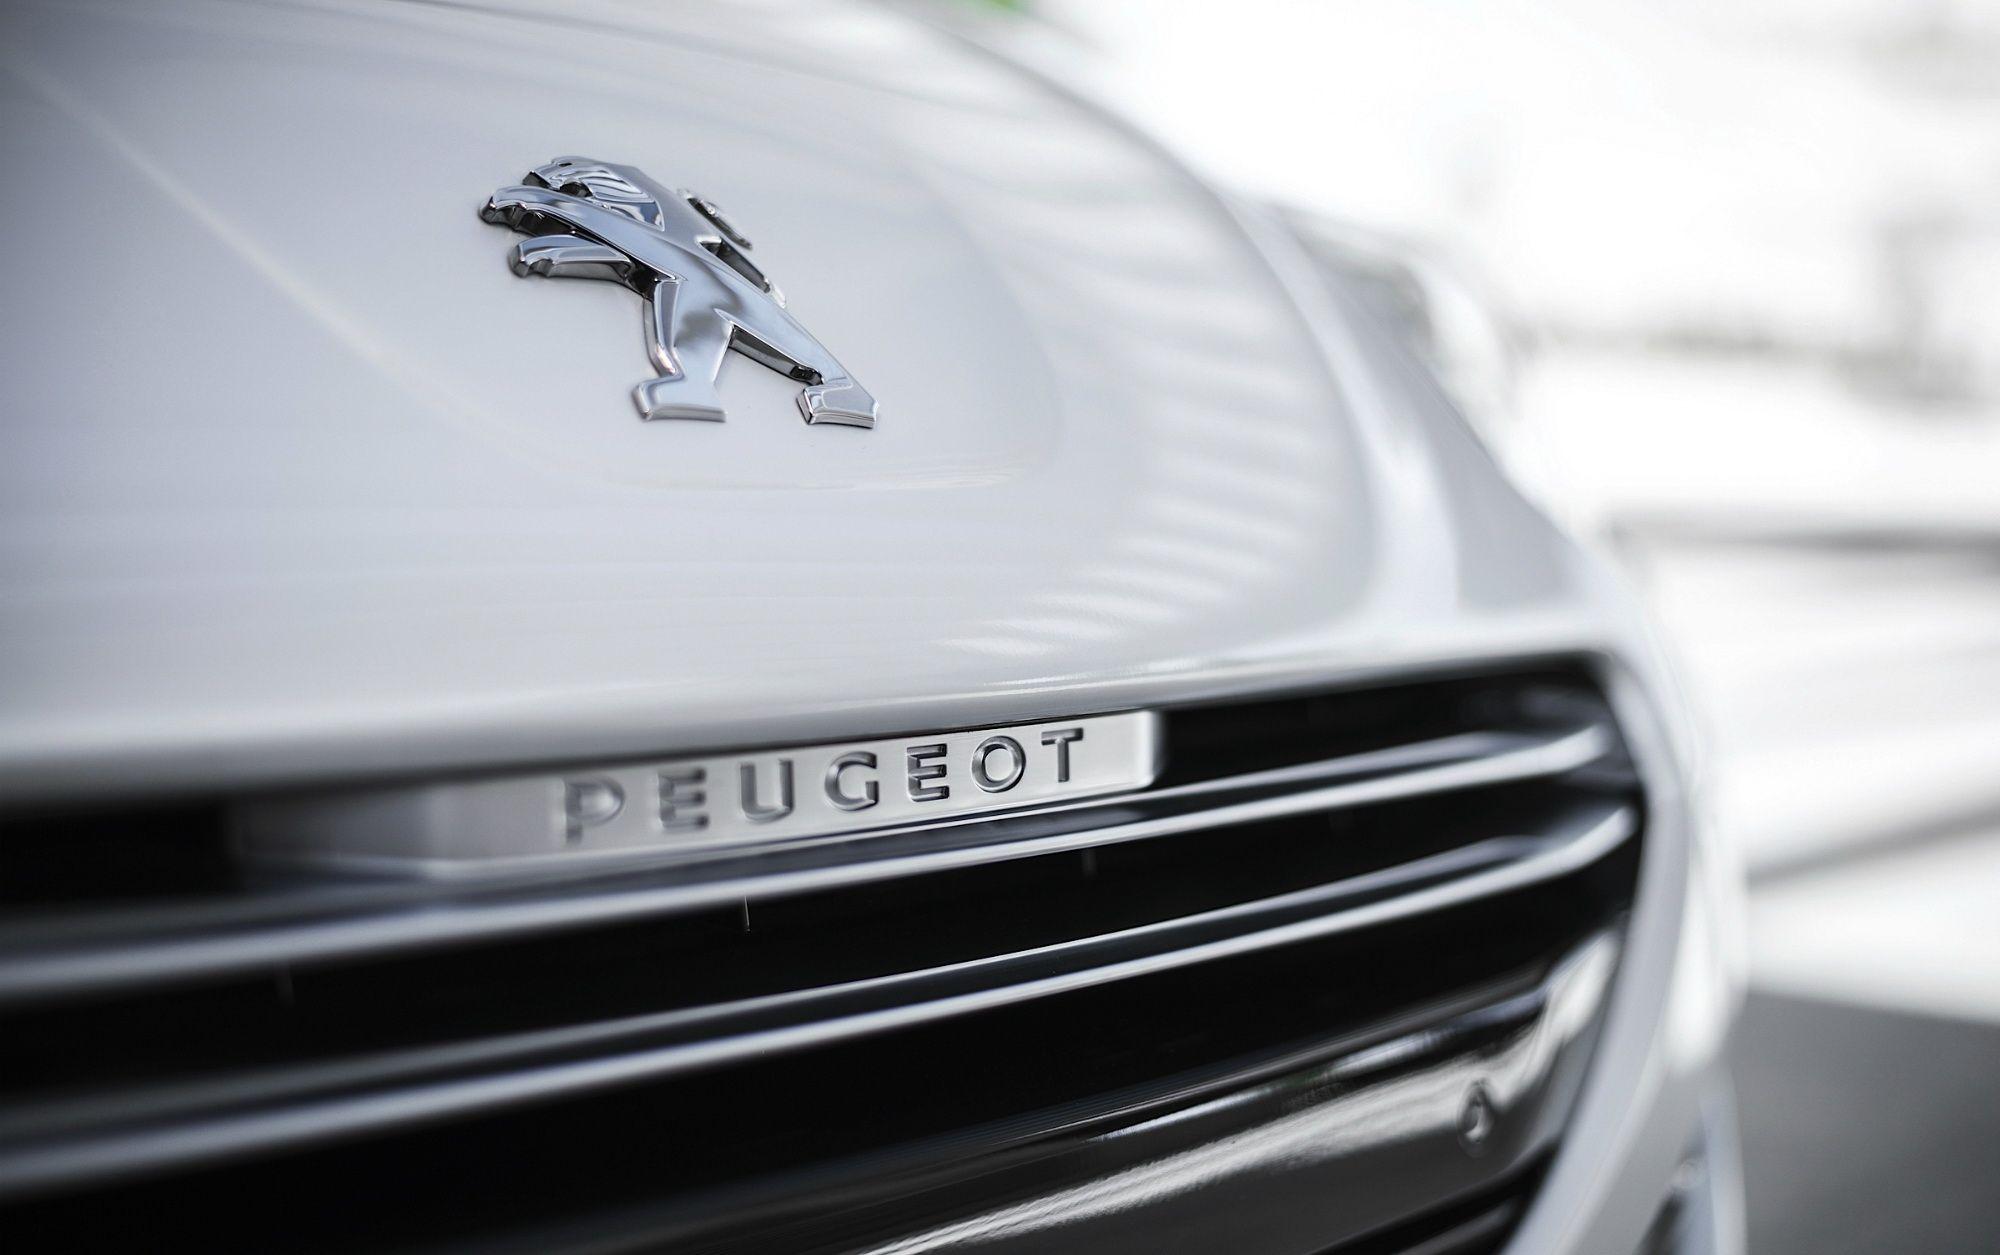 Lion Auto Logo - Peugeot Logo, Peugeot Car Symbol Meaning and History | Car Brand ...